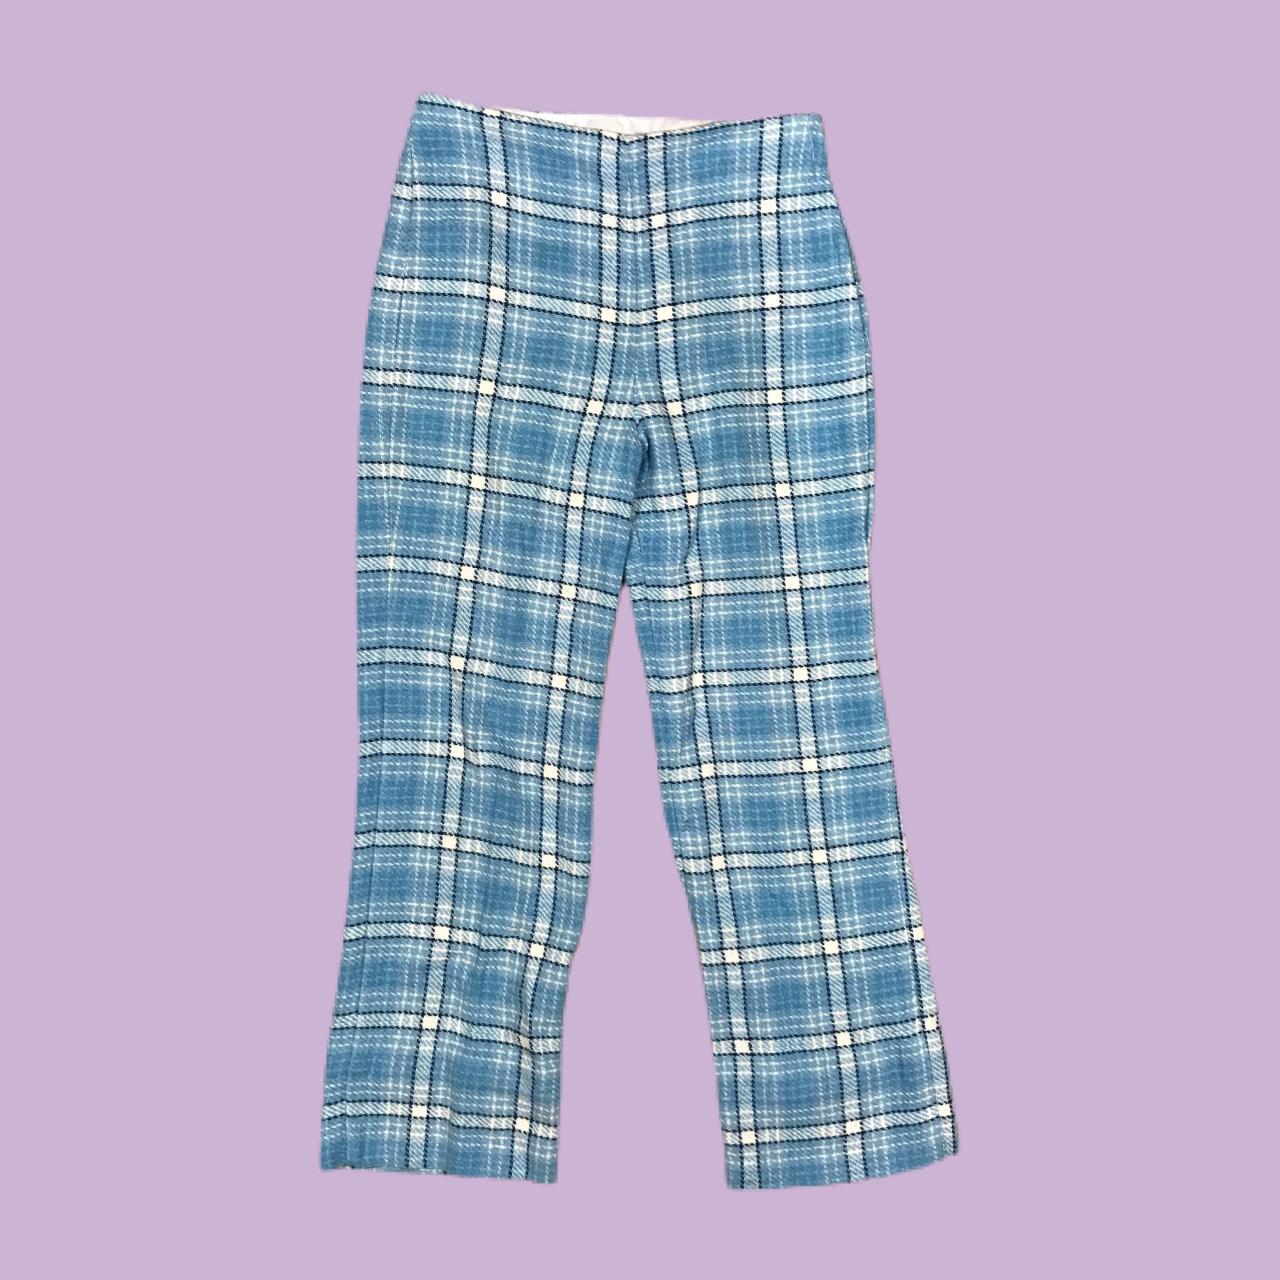 Product Image 3 - Vintage blue and white plaid